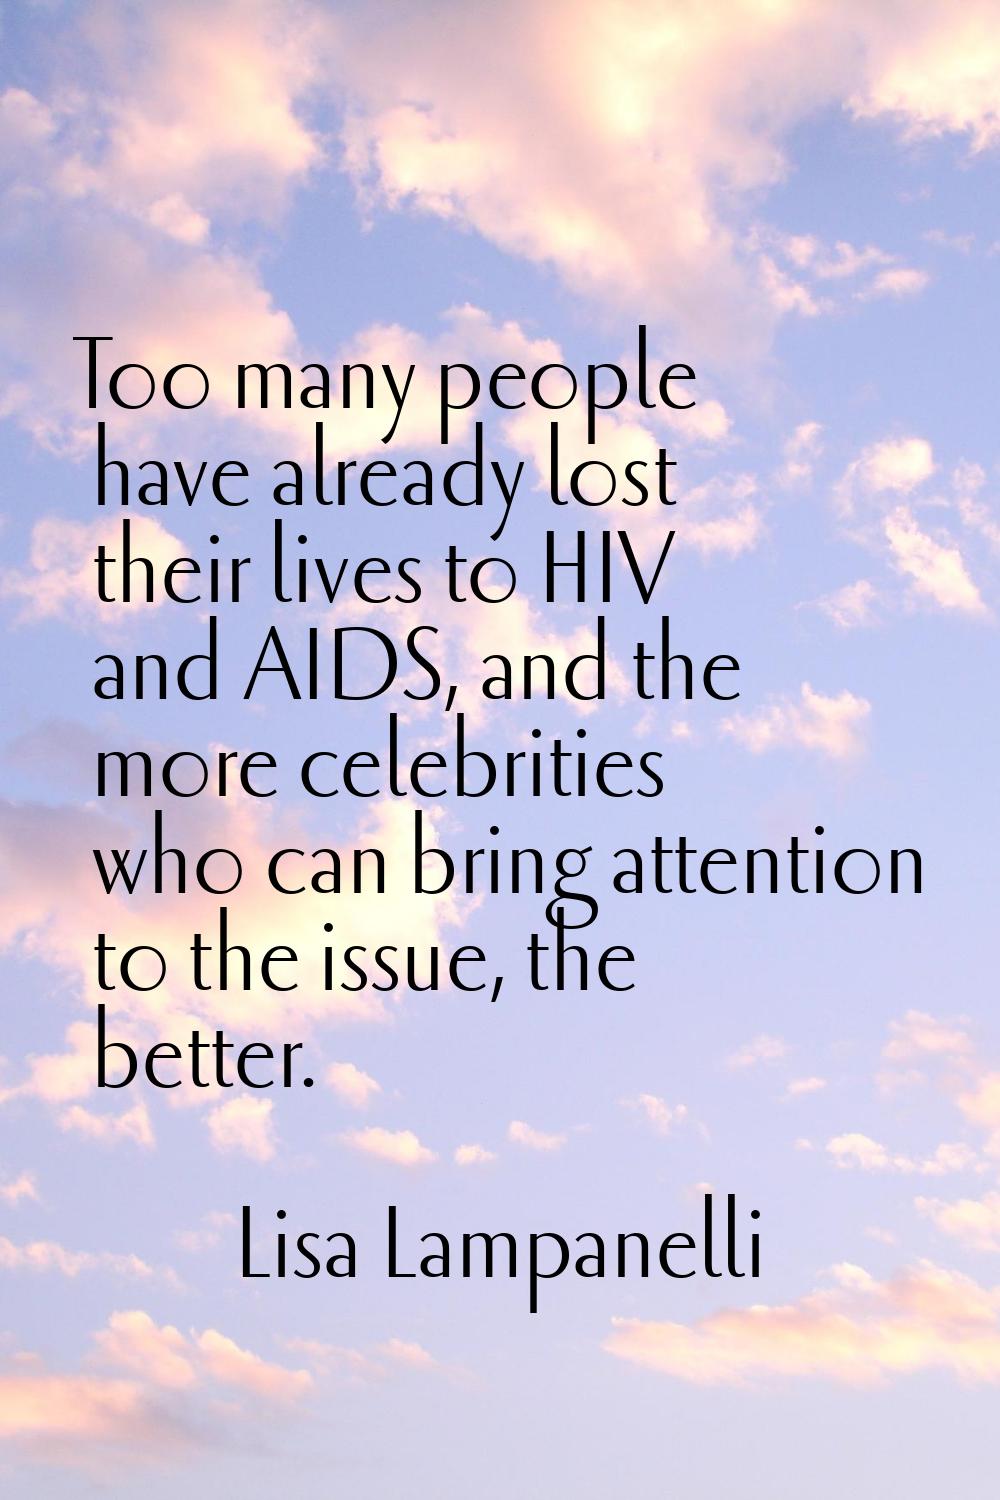 Too many people have already lost their lives to HIV and AIDS, and the more celebrities who can bri